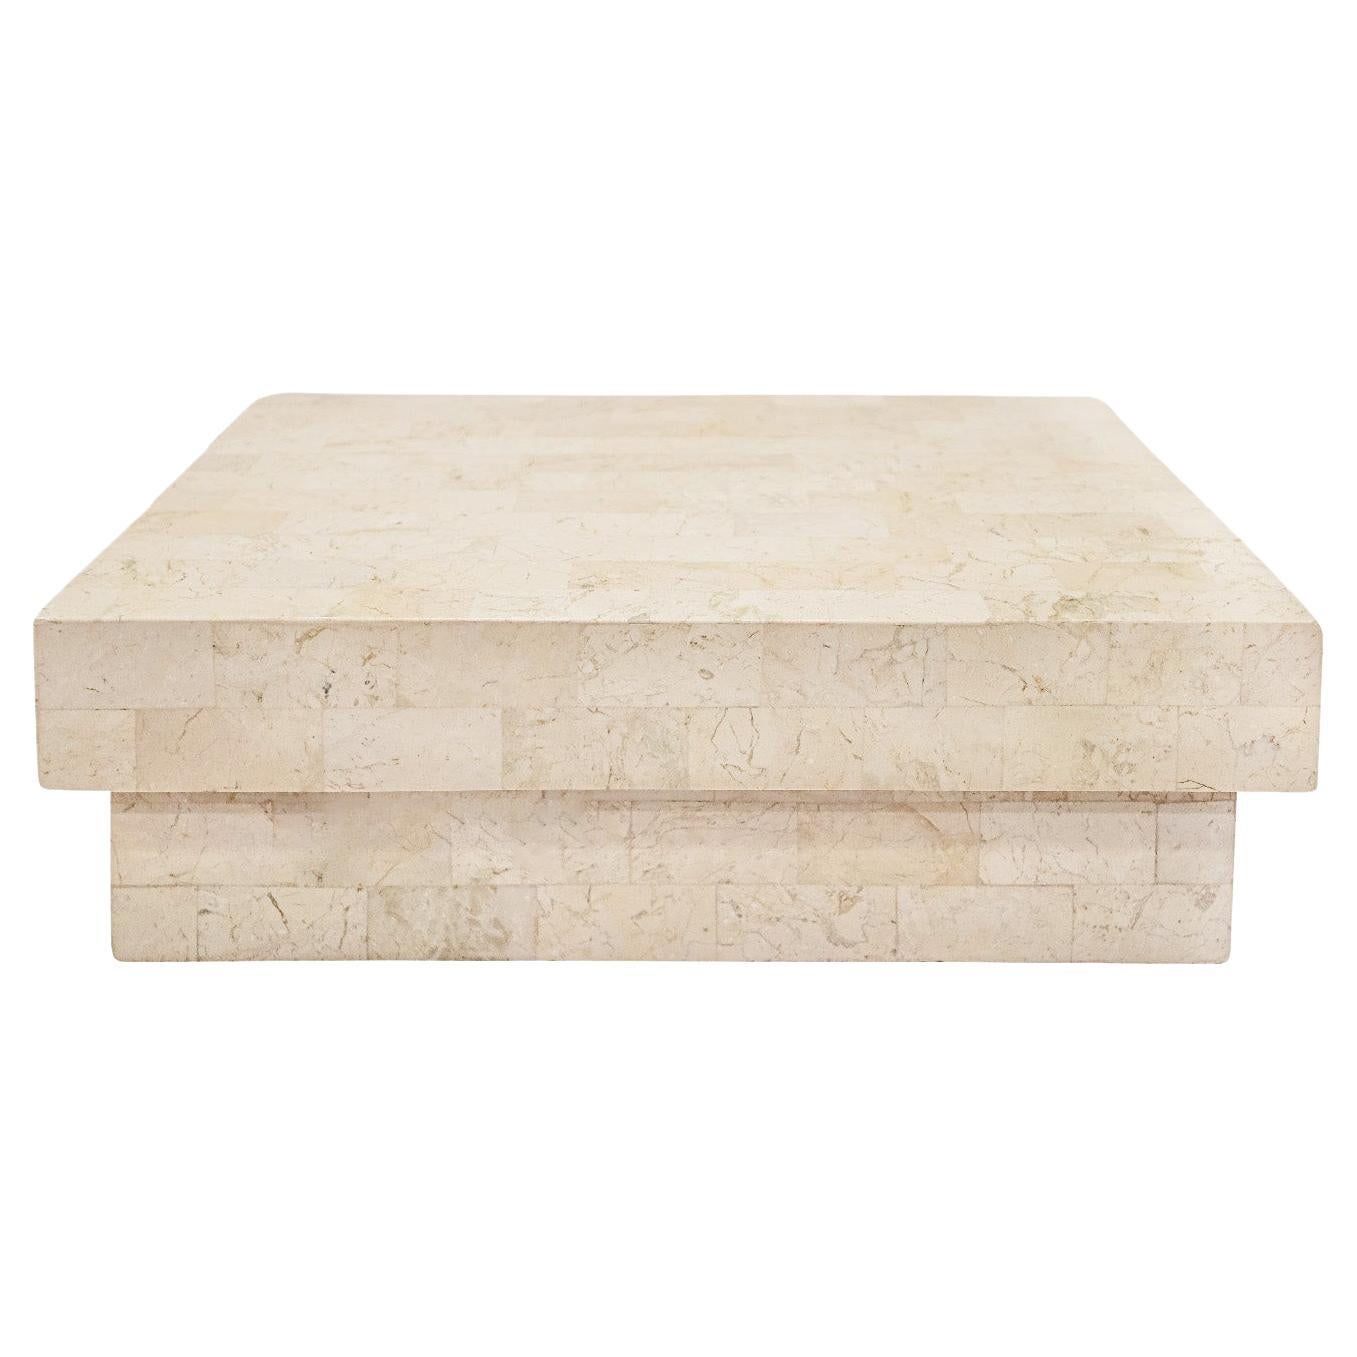 Karl Springer Exceptional Lidded Box in Tessellated Travertine 1980s 'Signed'